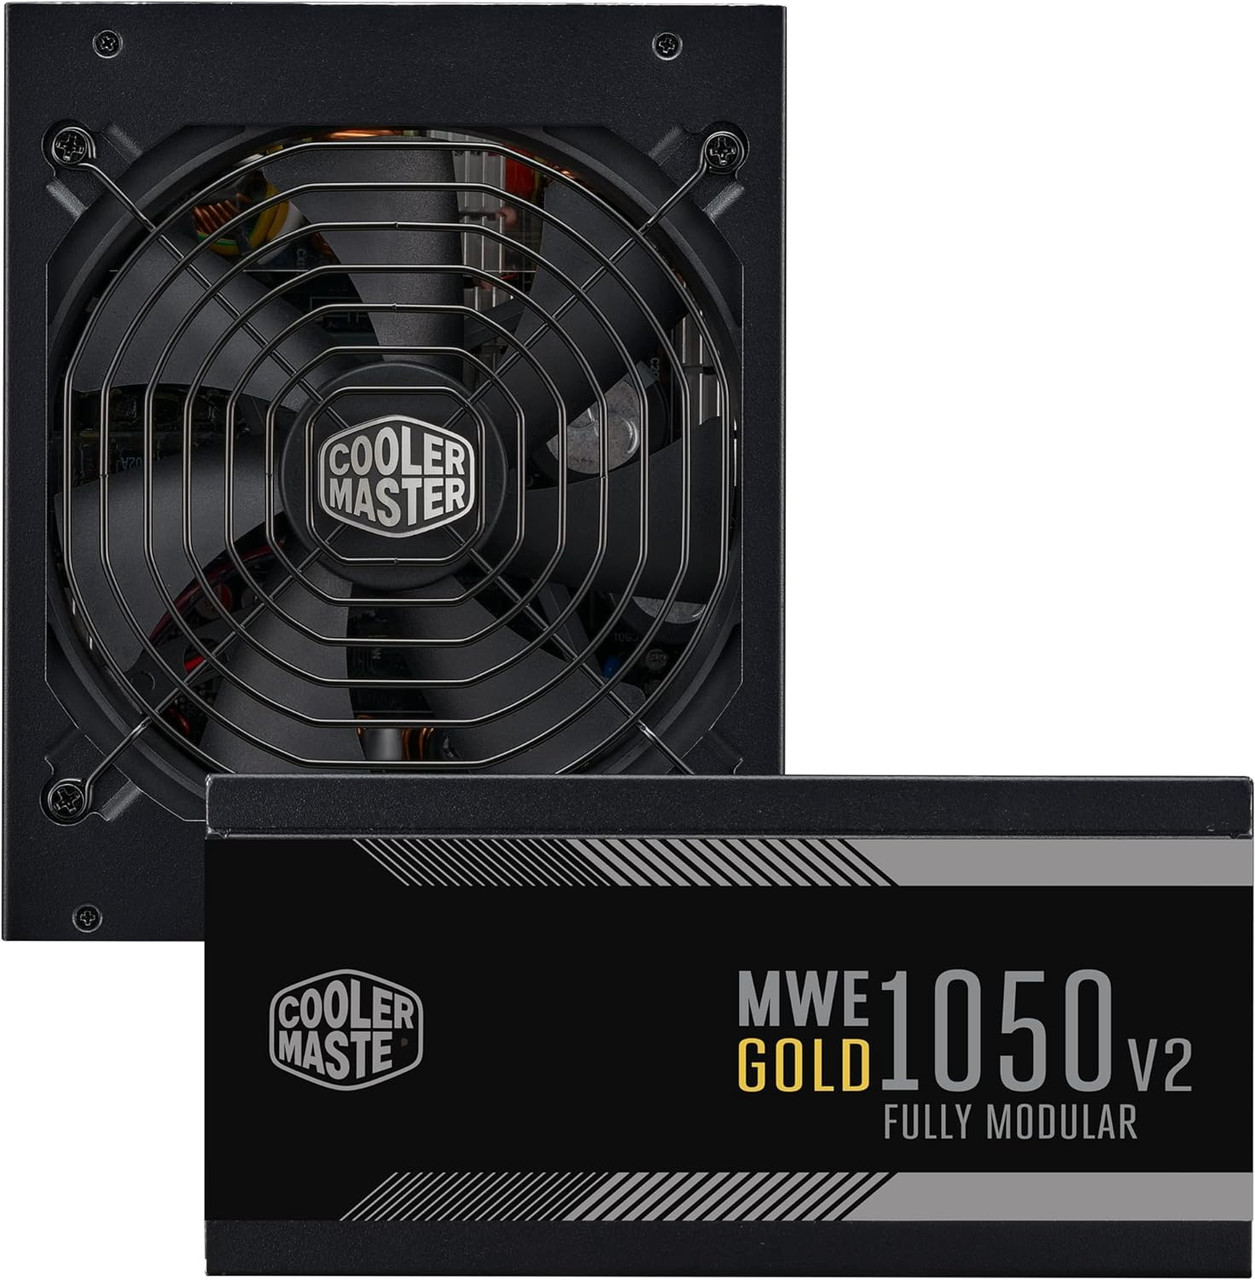 Cooler Master MWE Gold 1050 V2 ATX3.0 Fully Modular Power Supply, 1050W, 80+ Gold,140mm Fan MPE-A501-AFCAG-3US